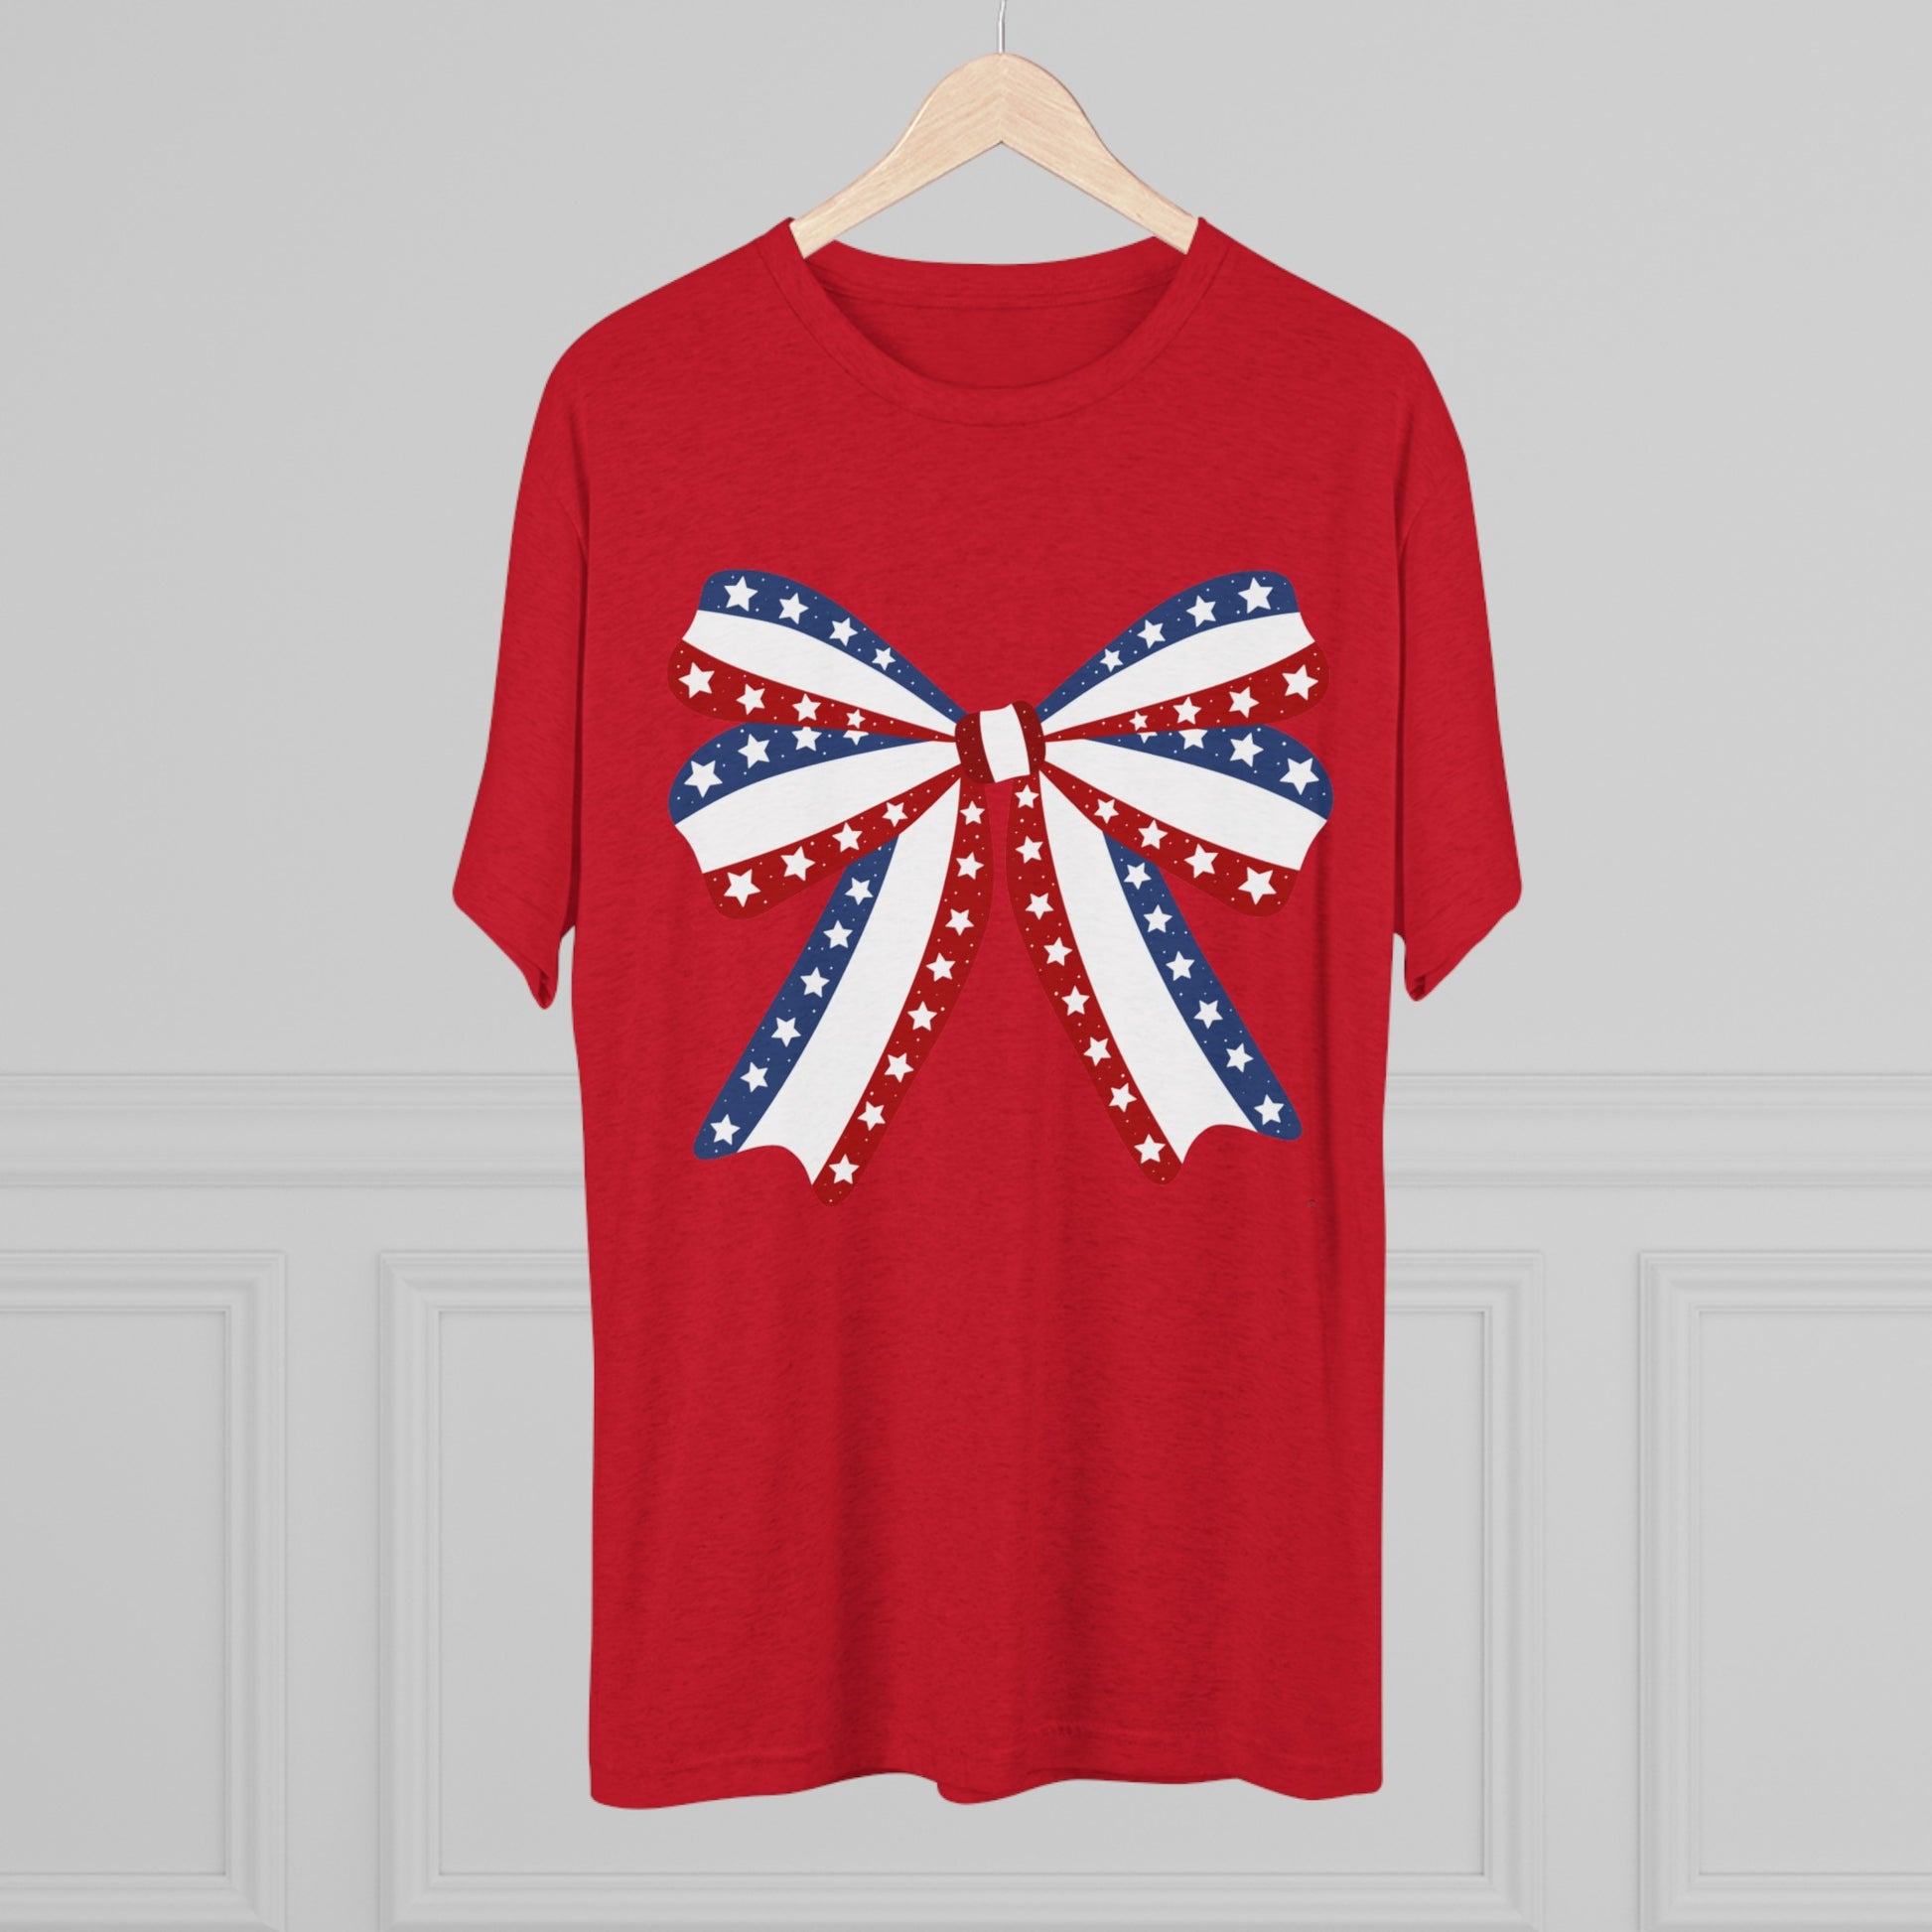 Get trendy with Patriotic Bow Tri-Blend Crew Tee - T-Shirt available at Good Gift Company. Grab yours for $18.96 today!